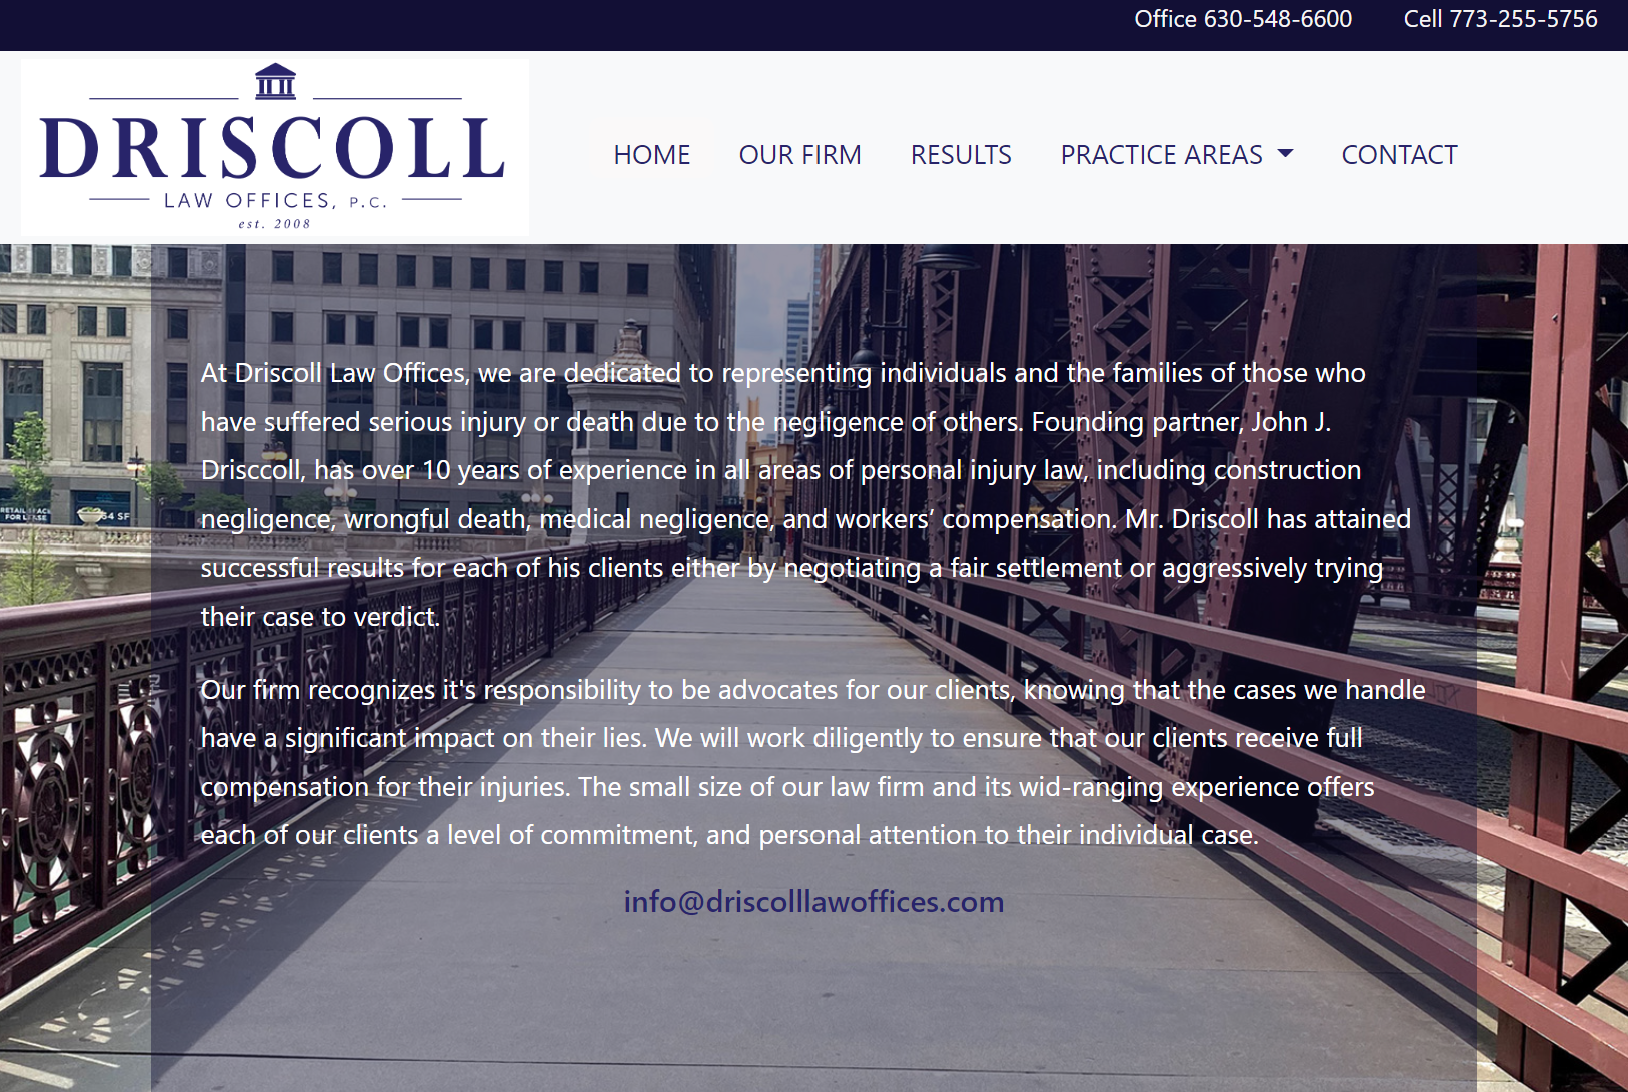 Driscoll law offices - website home page